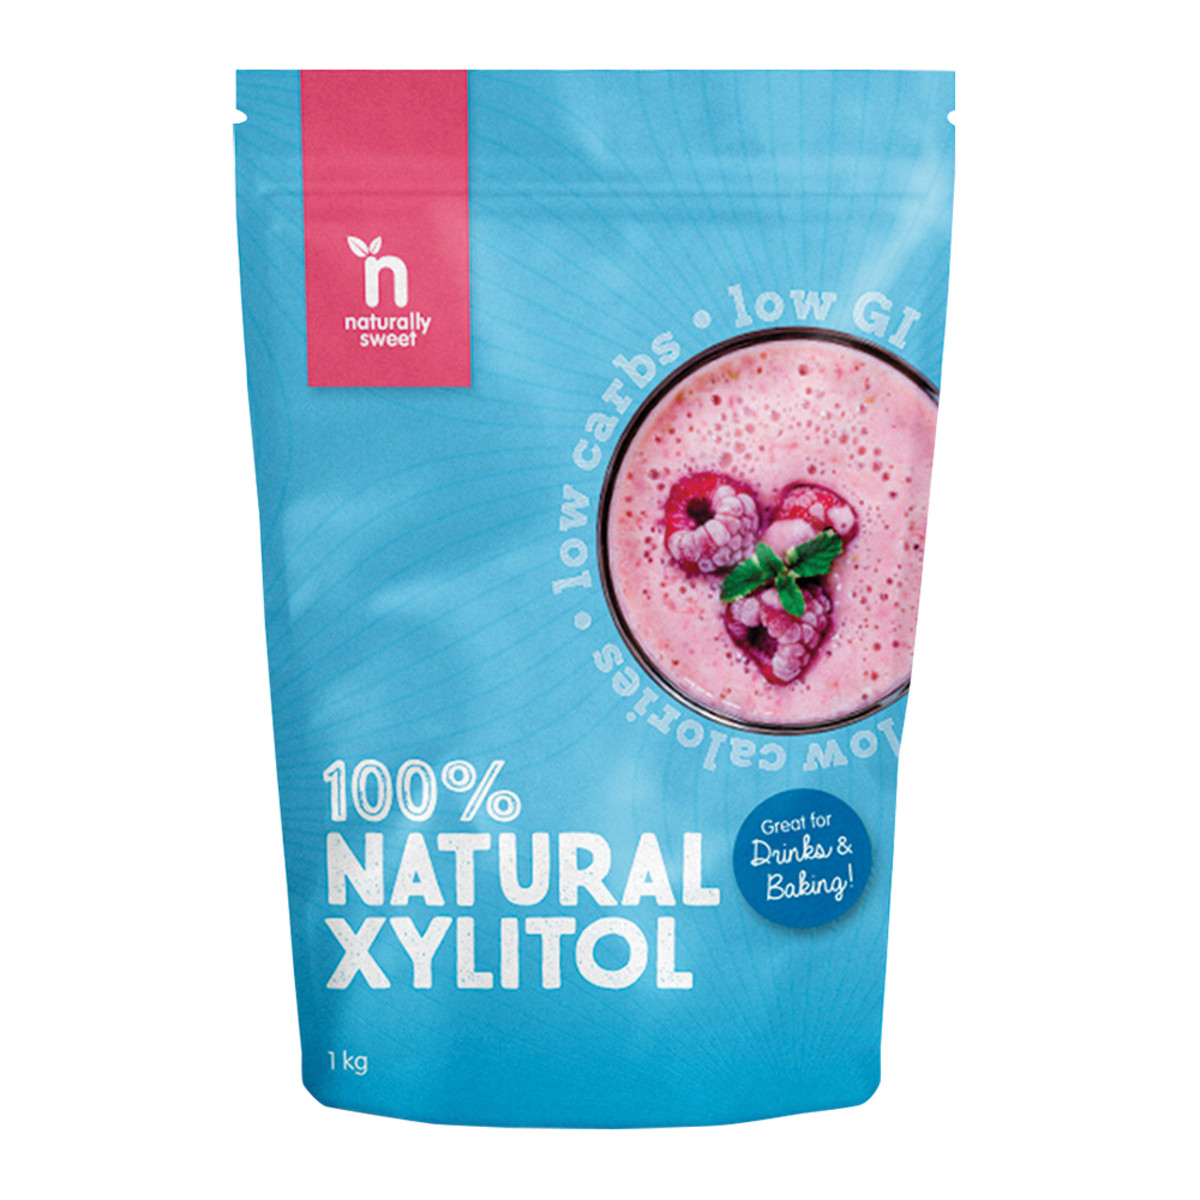 NATURALLY SWEET - Xylitol